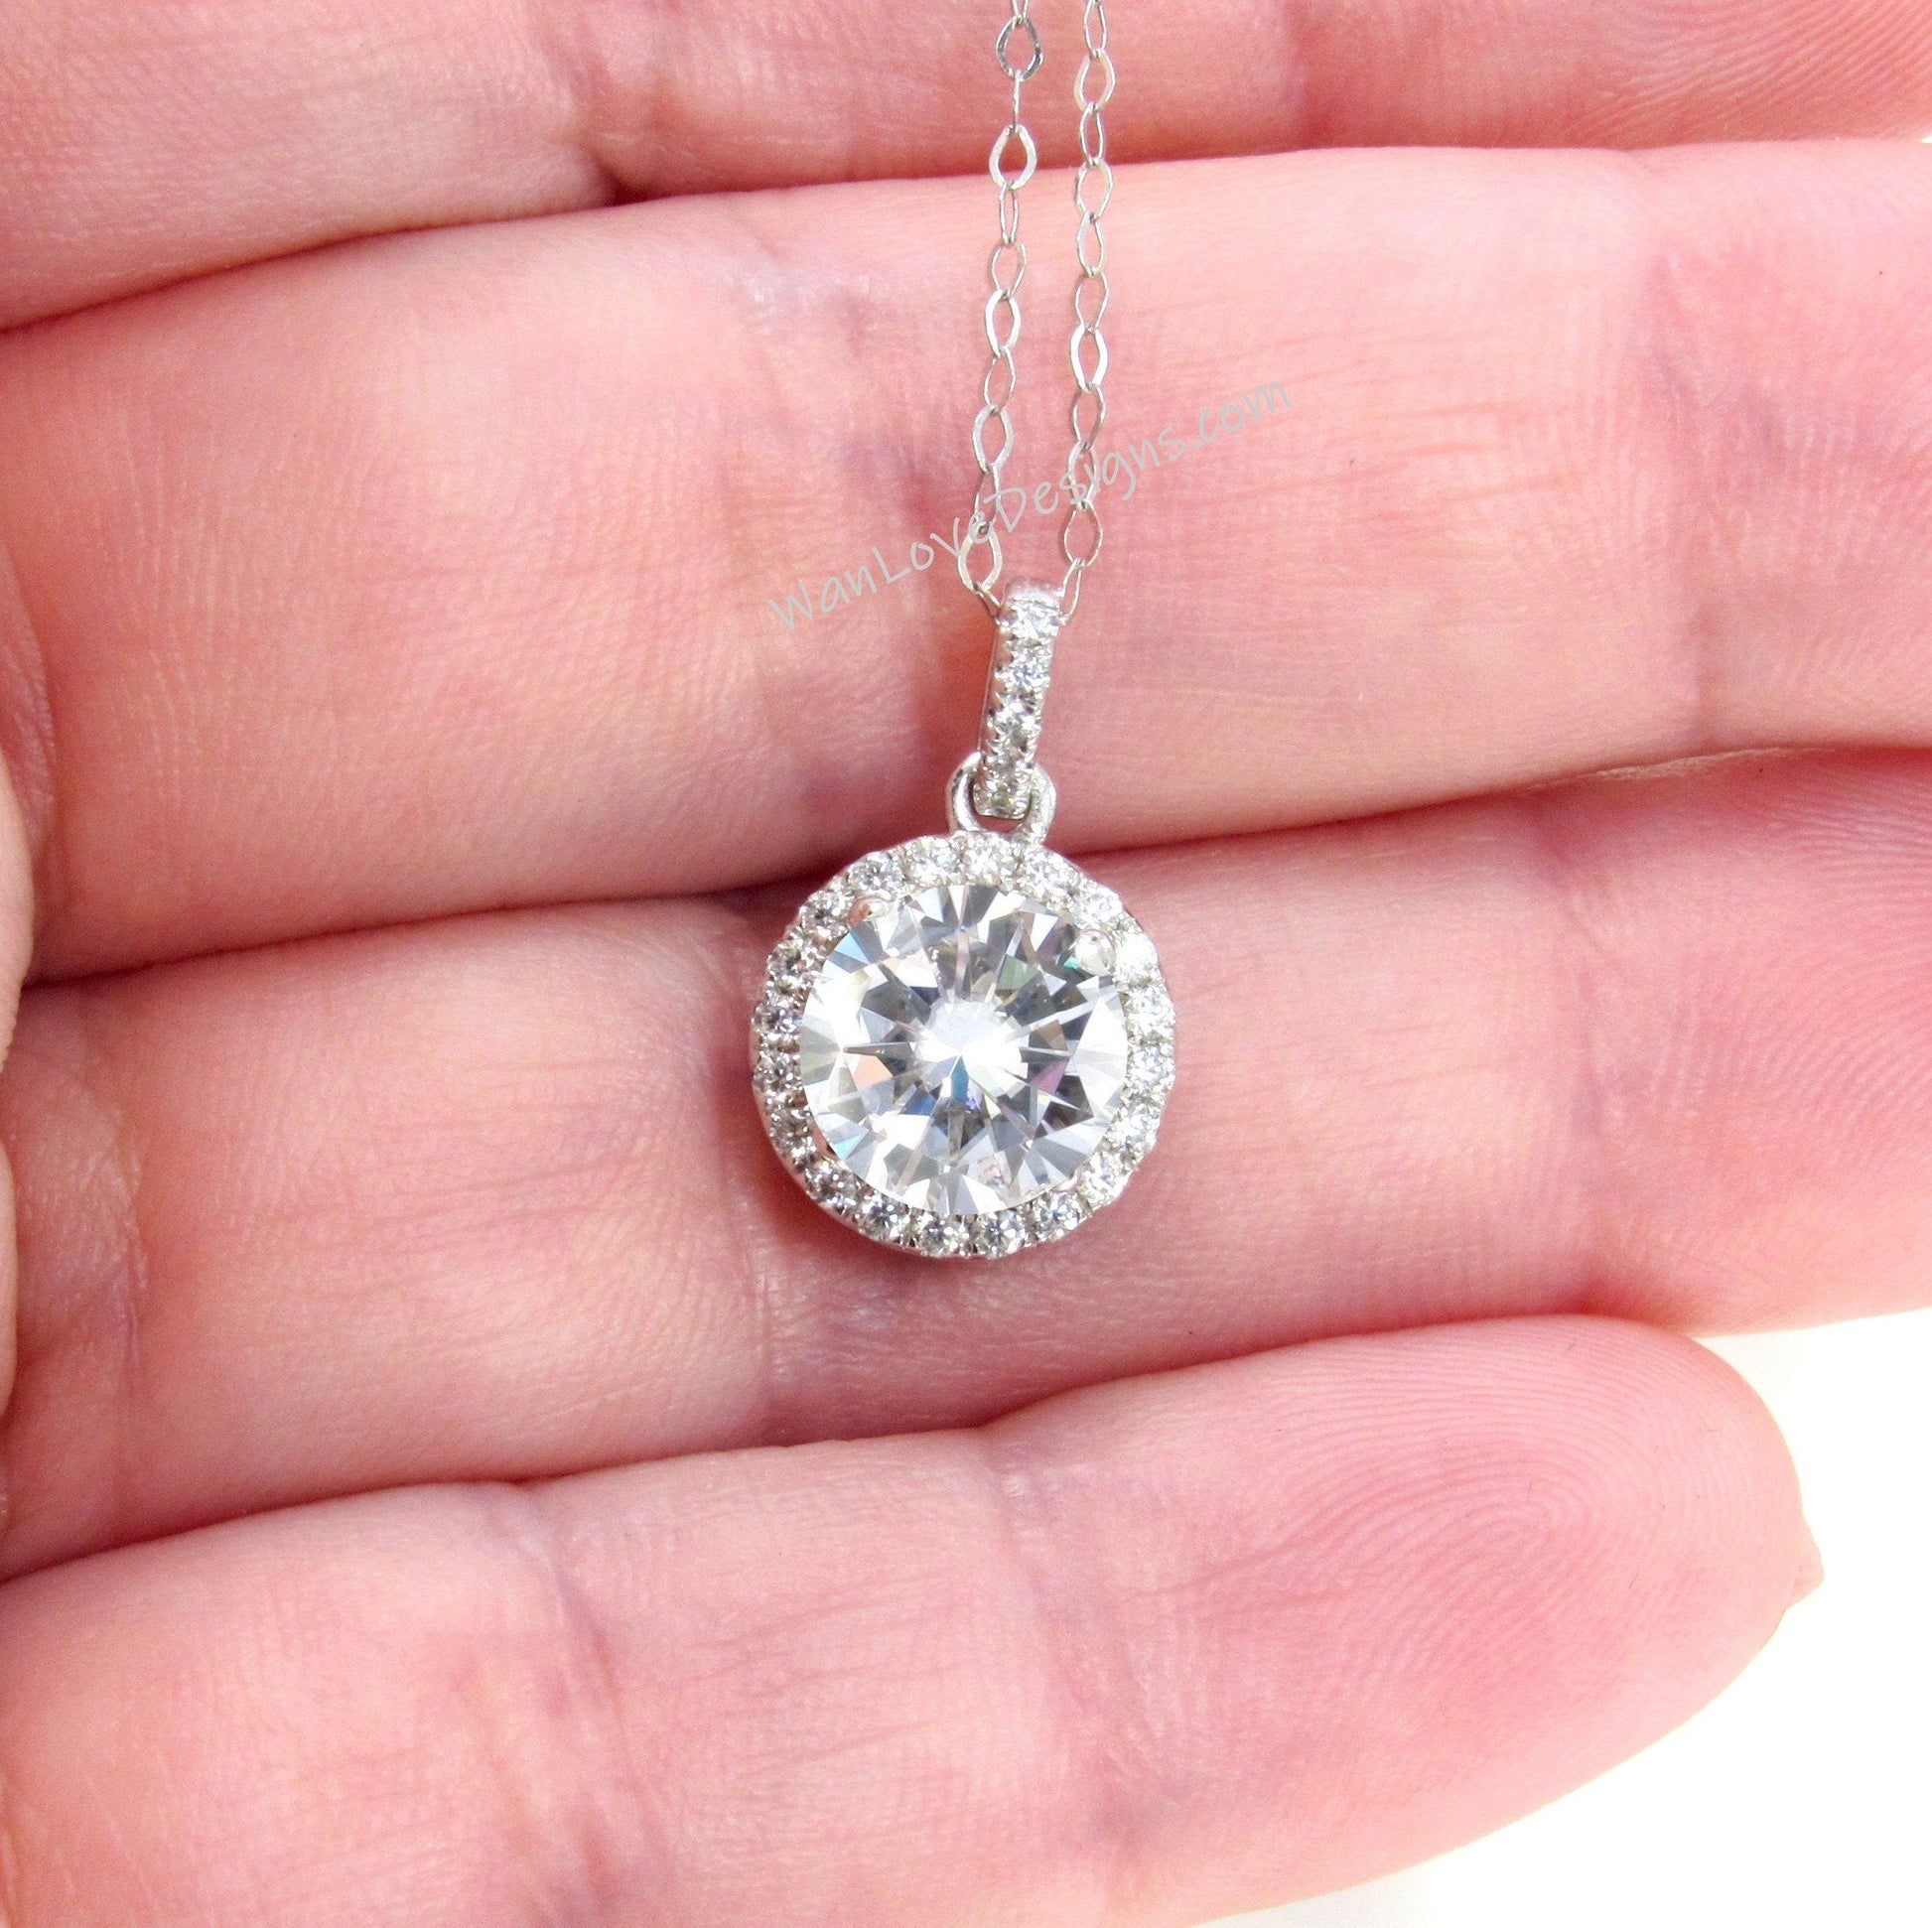 Birthstone Round Halo Necklace - 14k, 18k Yellow, Rose, White Gold or Platinum. Fully Customizable. Fine Jewelry Made to Order in GA Wan Love Designs